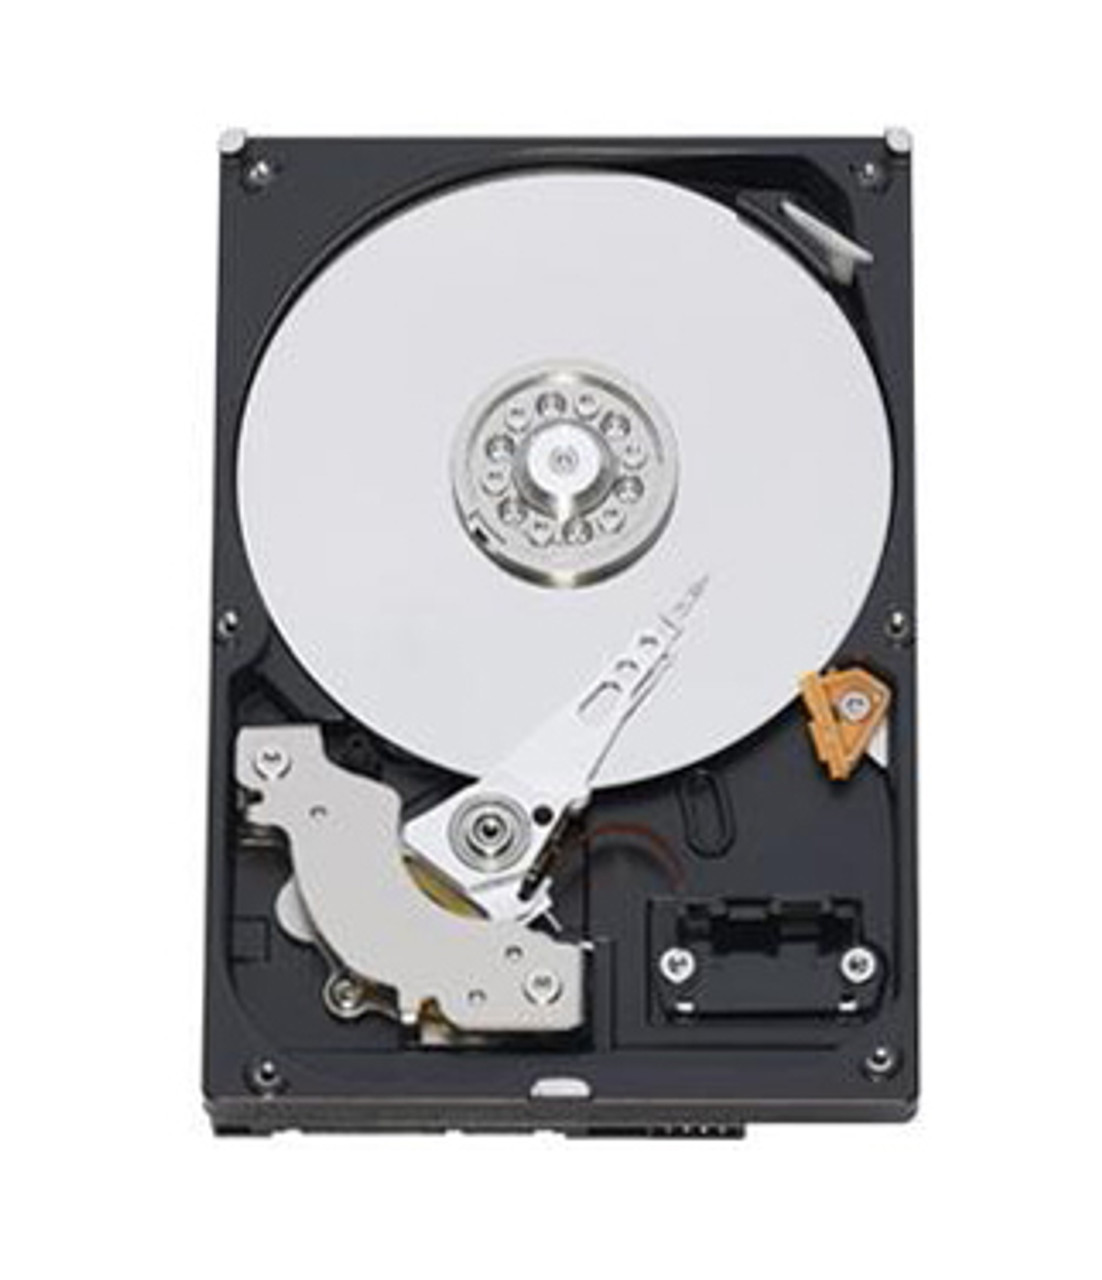 03X3951 IBM 2TB 7200RPM SATA 6Gbps Hot Swap 3.5-inch Internal Hard Drive for ThinkServer RD530 and RD630